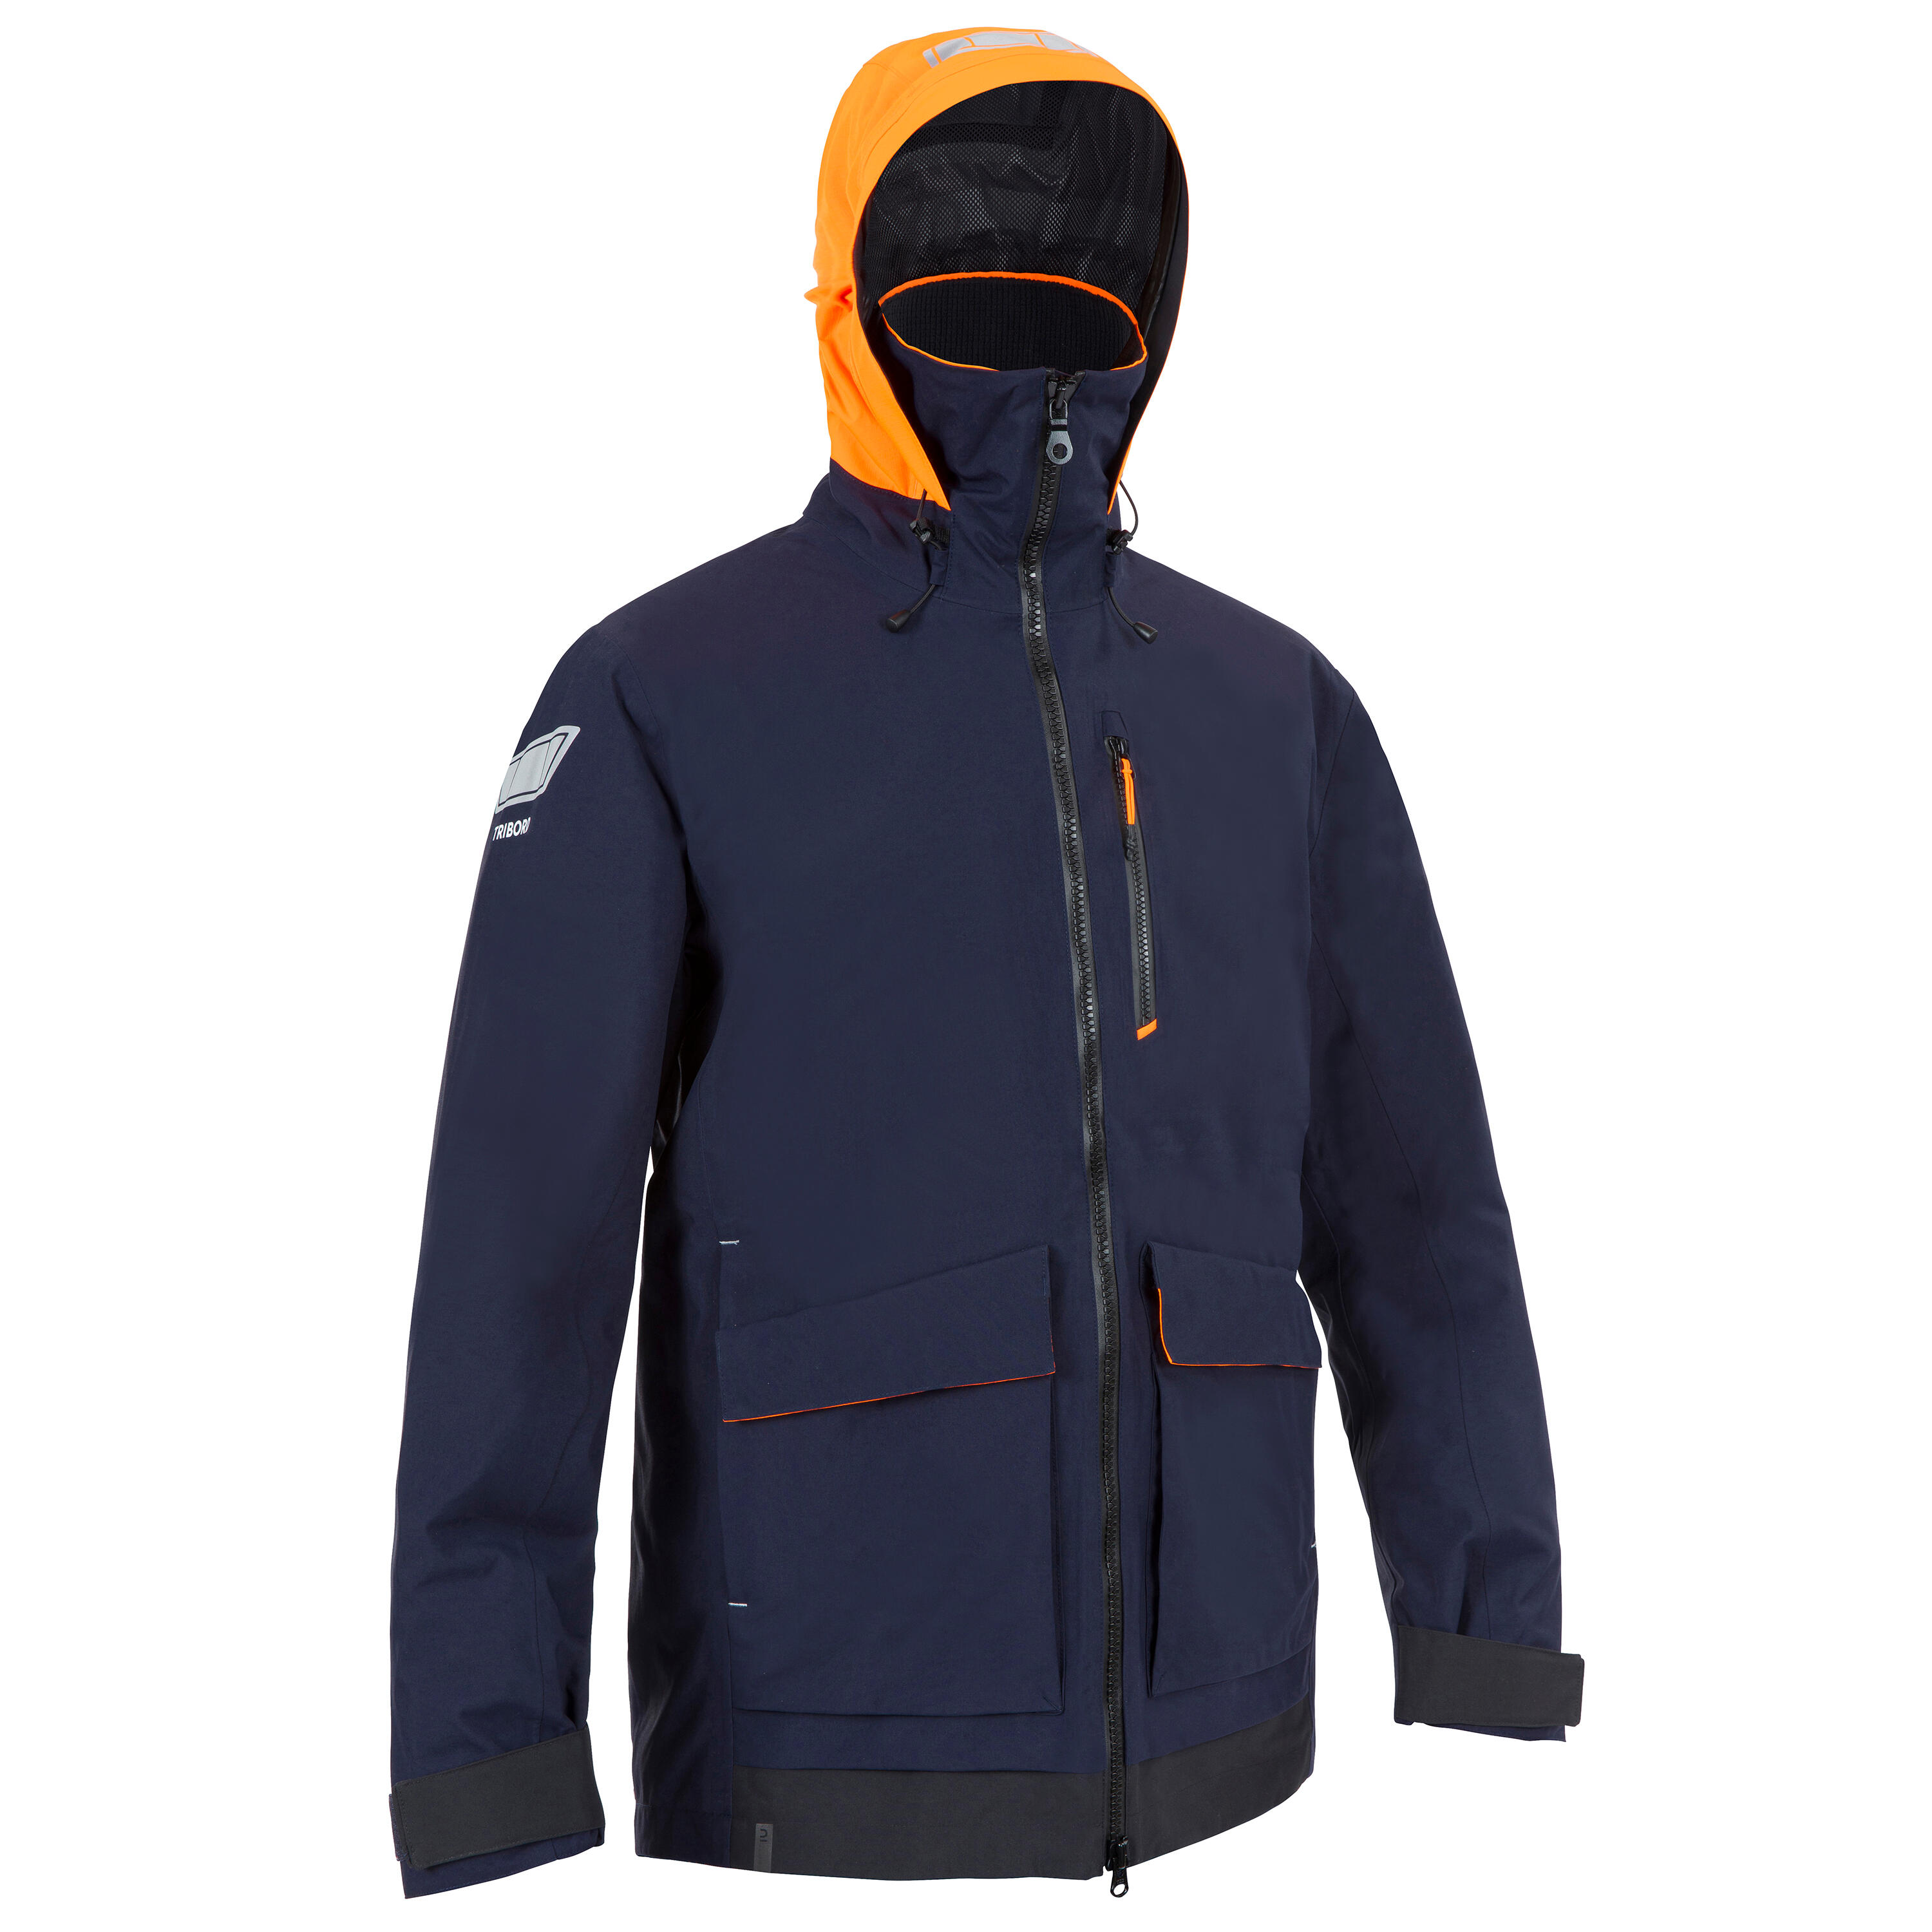 TRIBORD Men's Sailing 500 waterproof and windproof sailing anorak - navy blue